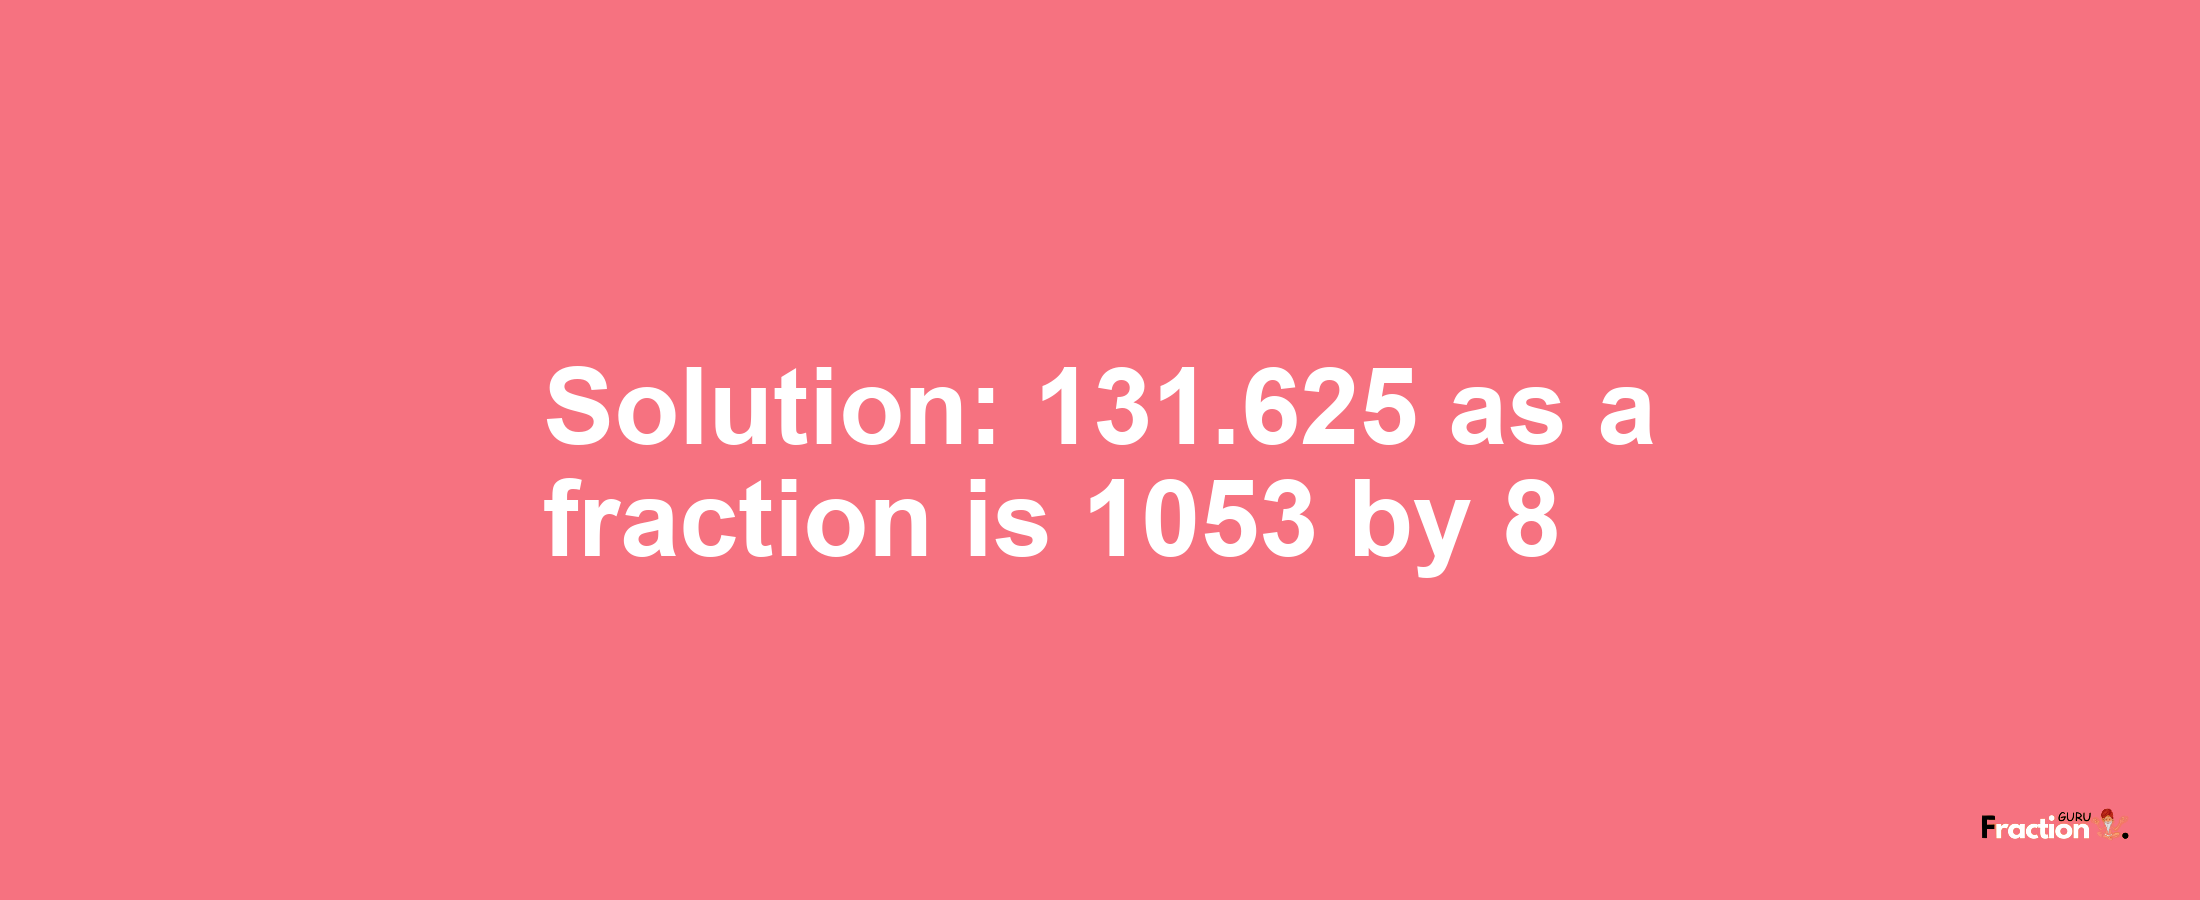 Solution:131.625 as a fraction is 1053/8